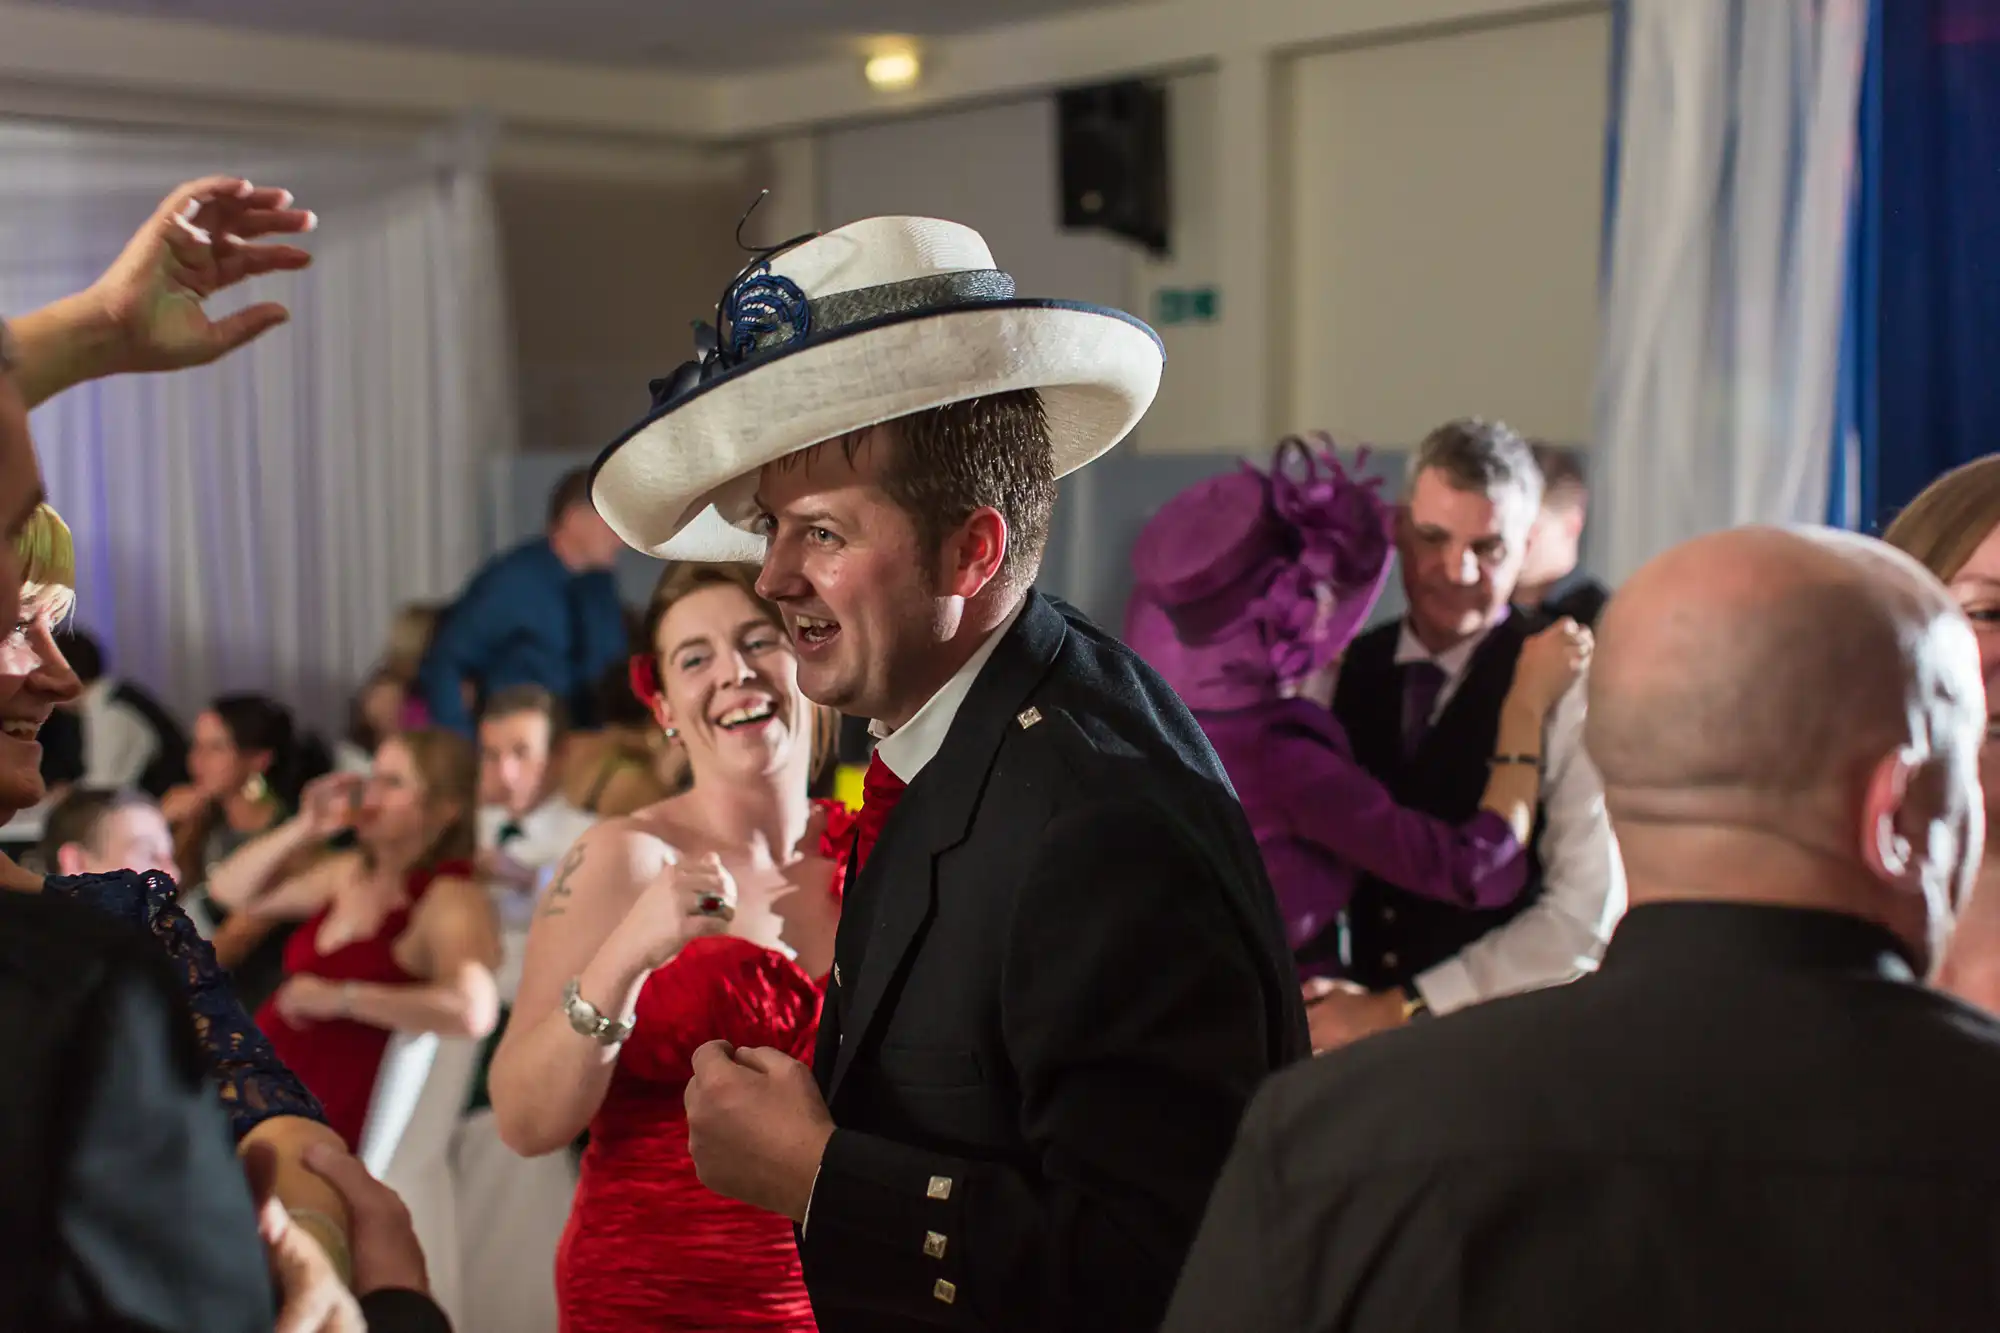 A man in a suit and cowboy hat dances with a woman in a red dress at a lively indoor wedding reception, surrounded by smiling guests.